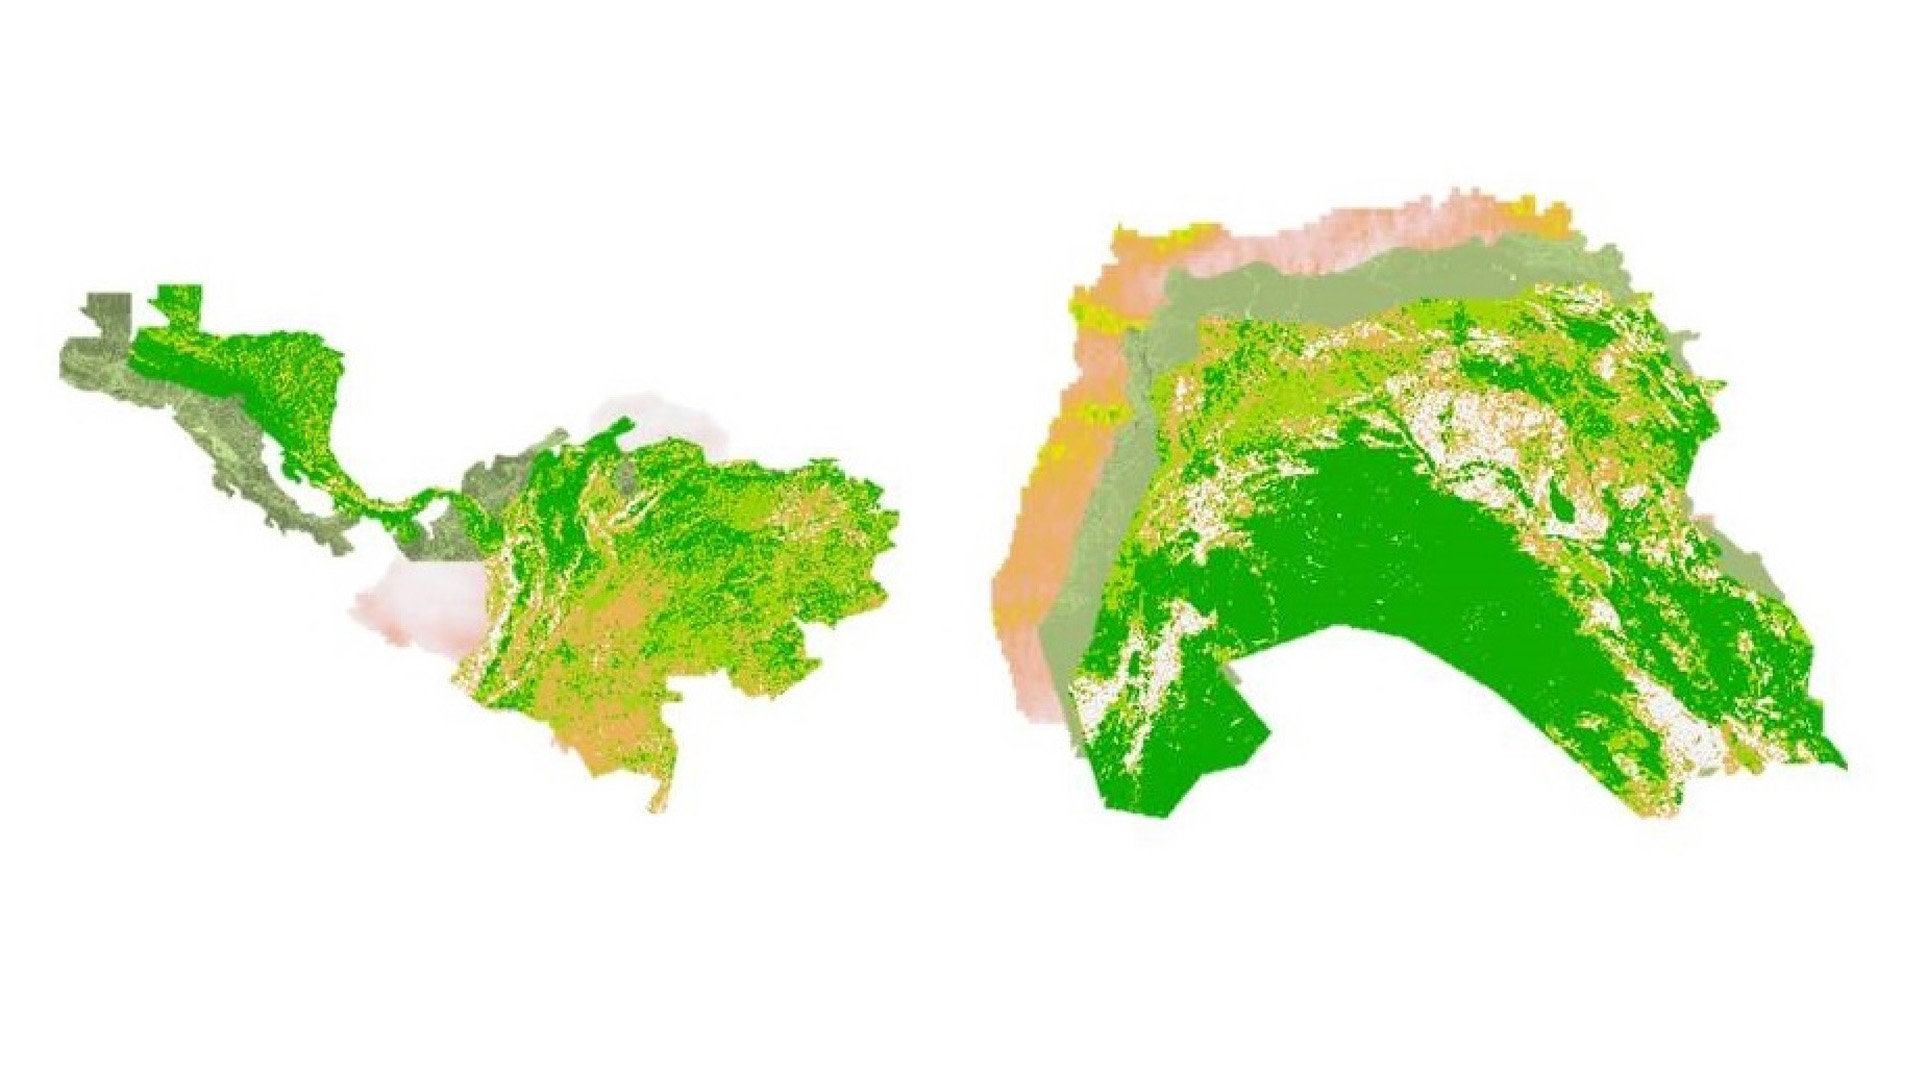 Levant & Central America study regions for drought monitoring. Image Credit: Levant & Central America Climate II Team.